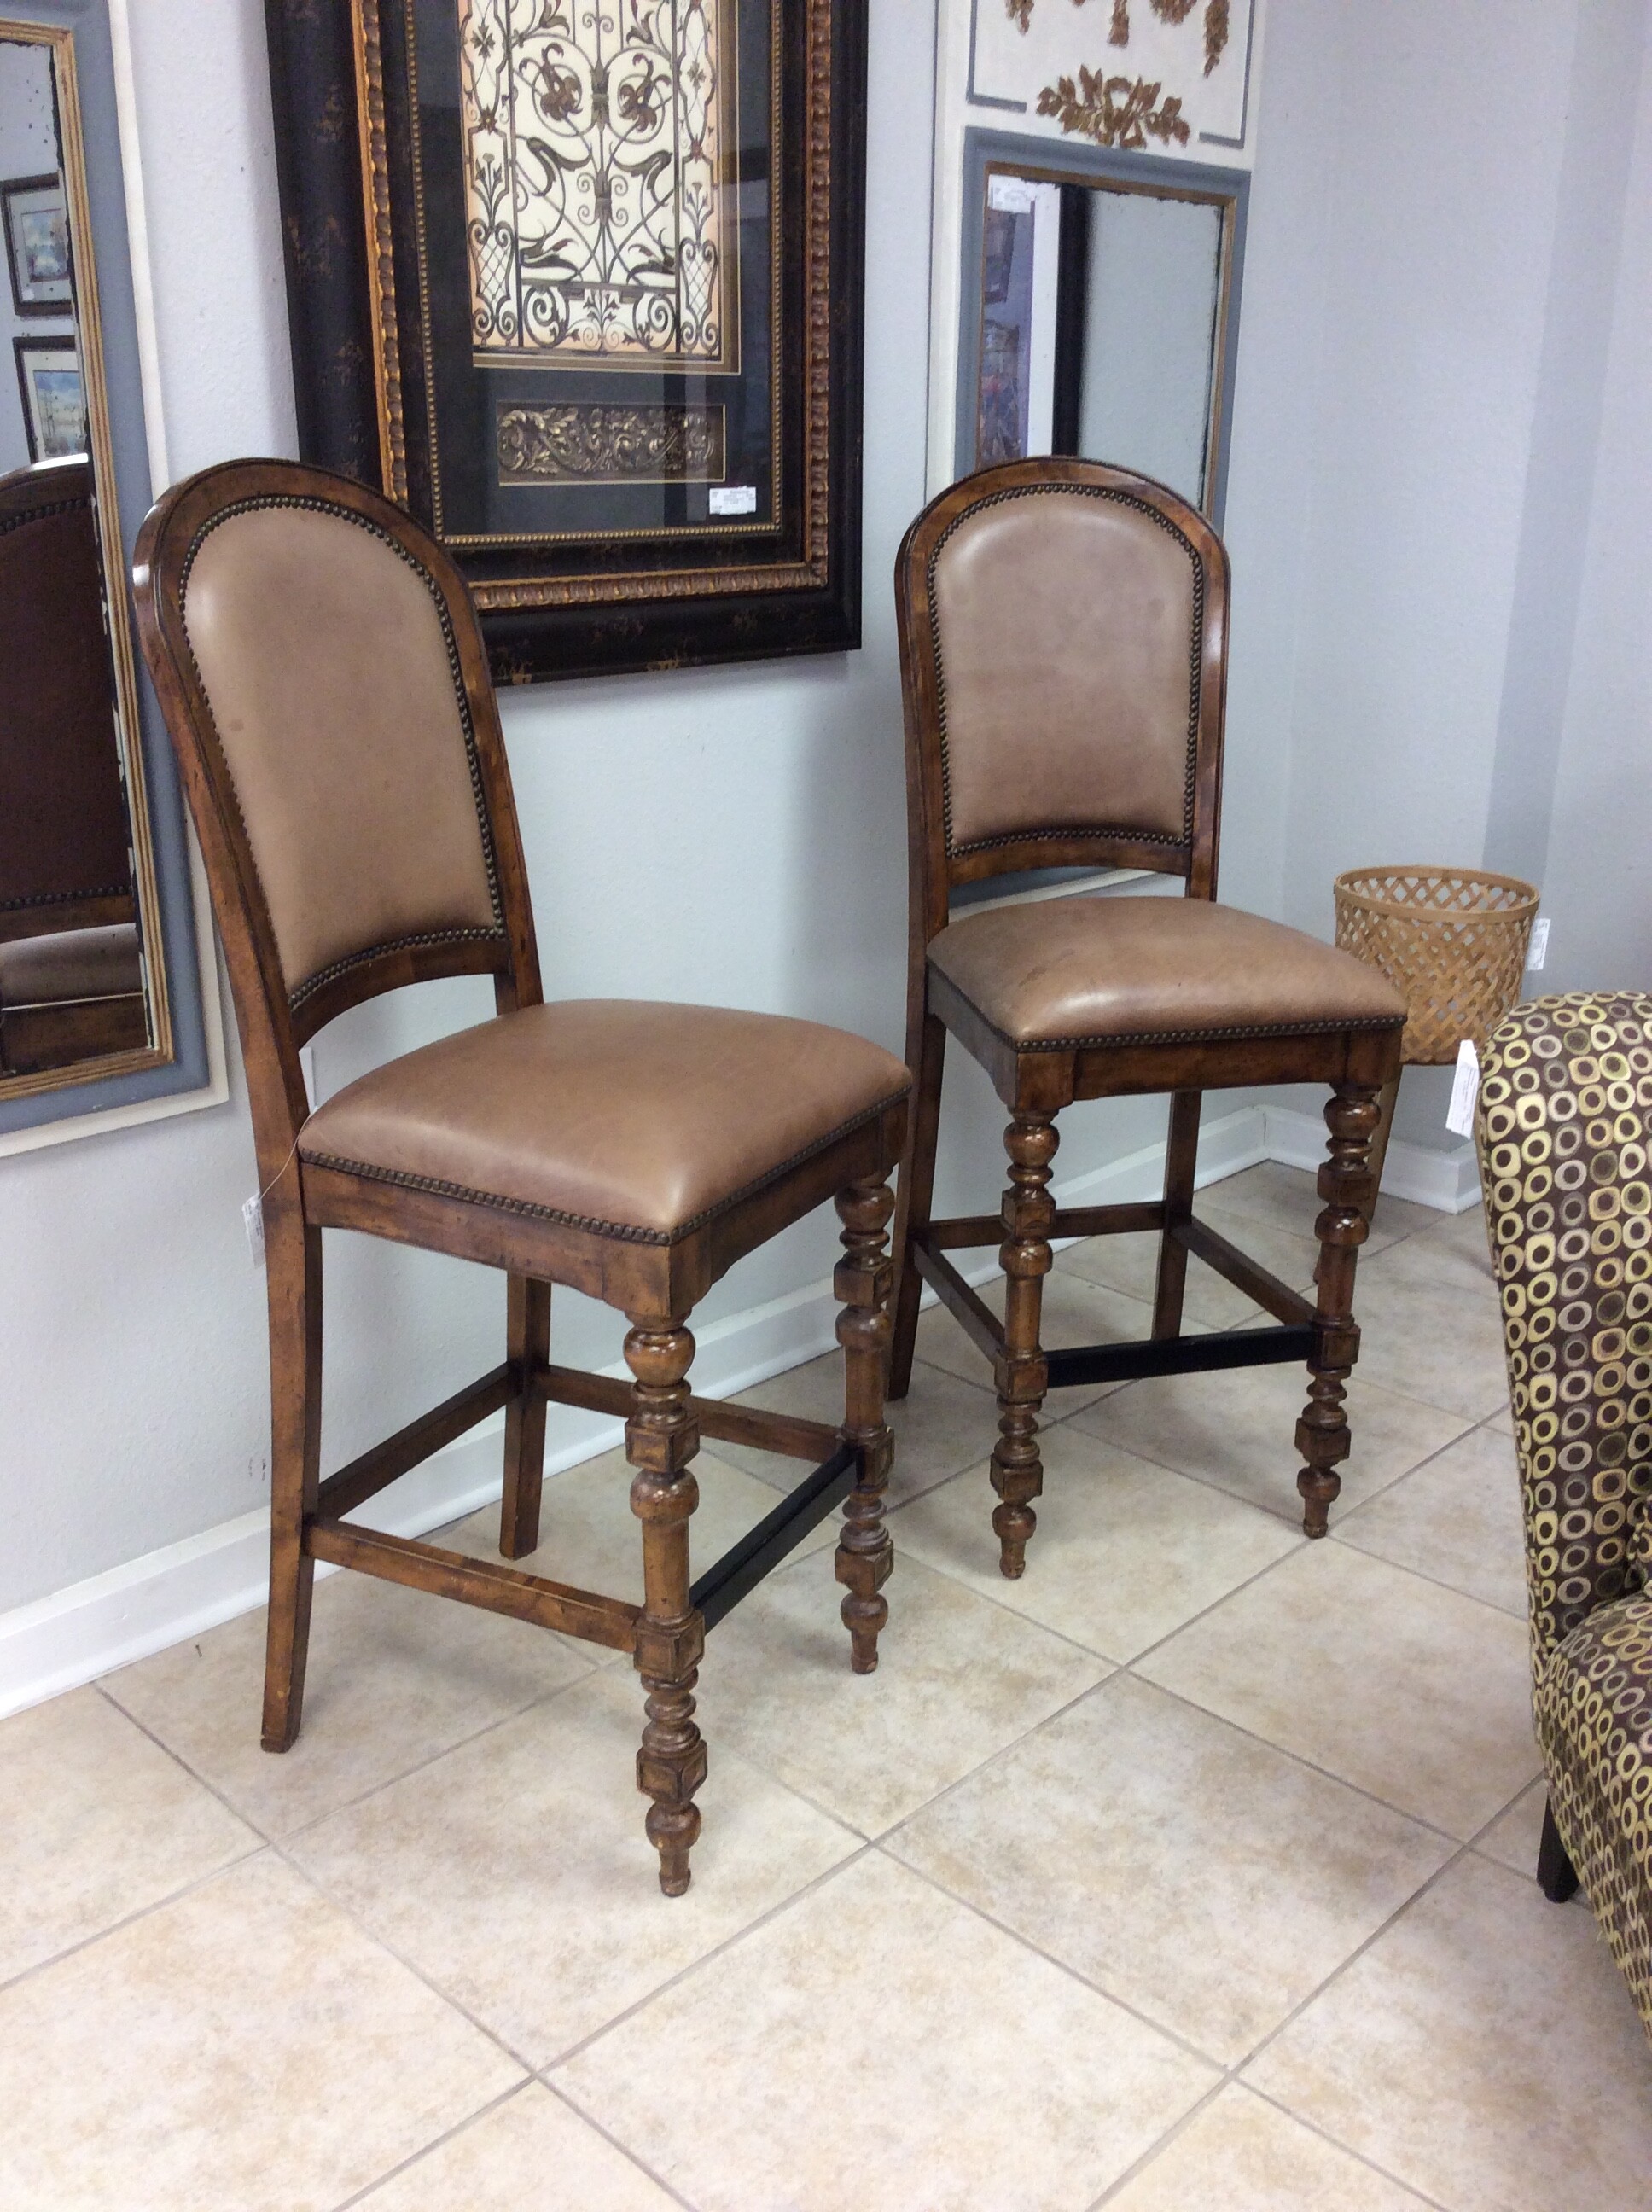 This is a gorgeous pair of barstools by Bernhardt Furniture. Rustic in style, they are solid and well-made. They feature a dark wood finish with lovely carved details. Distressing has been added for that timeless, weathered look that is so popular and even more so withTexas Rustic. The leather upholstered seats are delish, soft and supple in a light brown. All finished off with a bold nailhead trim.